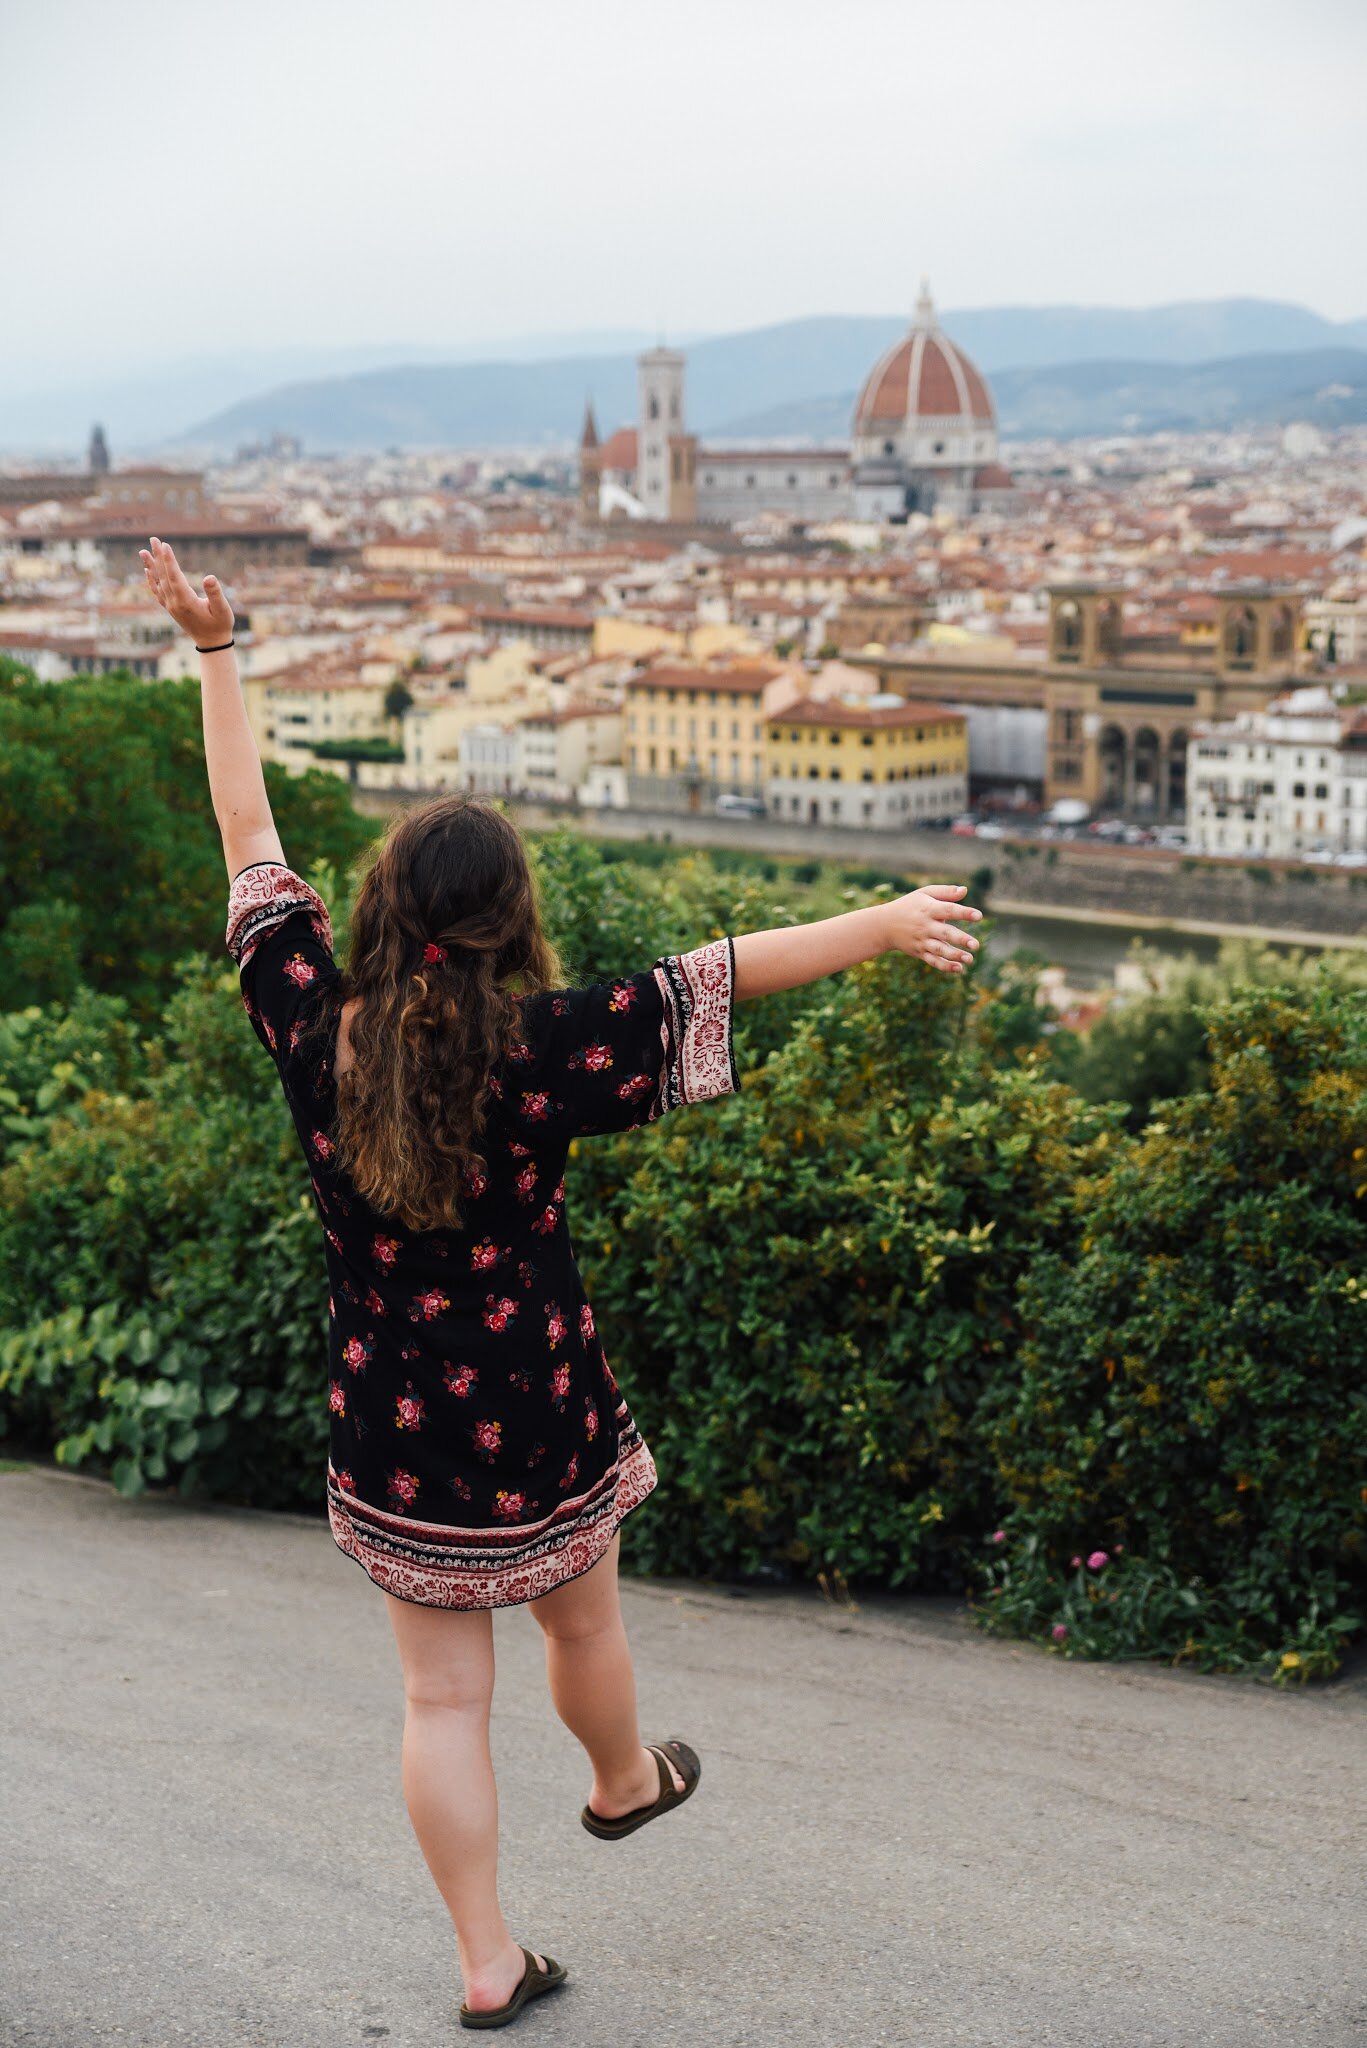 The beauty of Italy is truly magical. Let yourself soak it up.